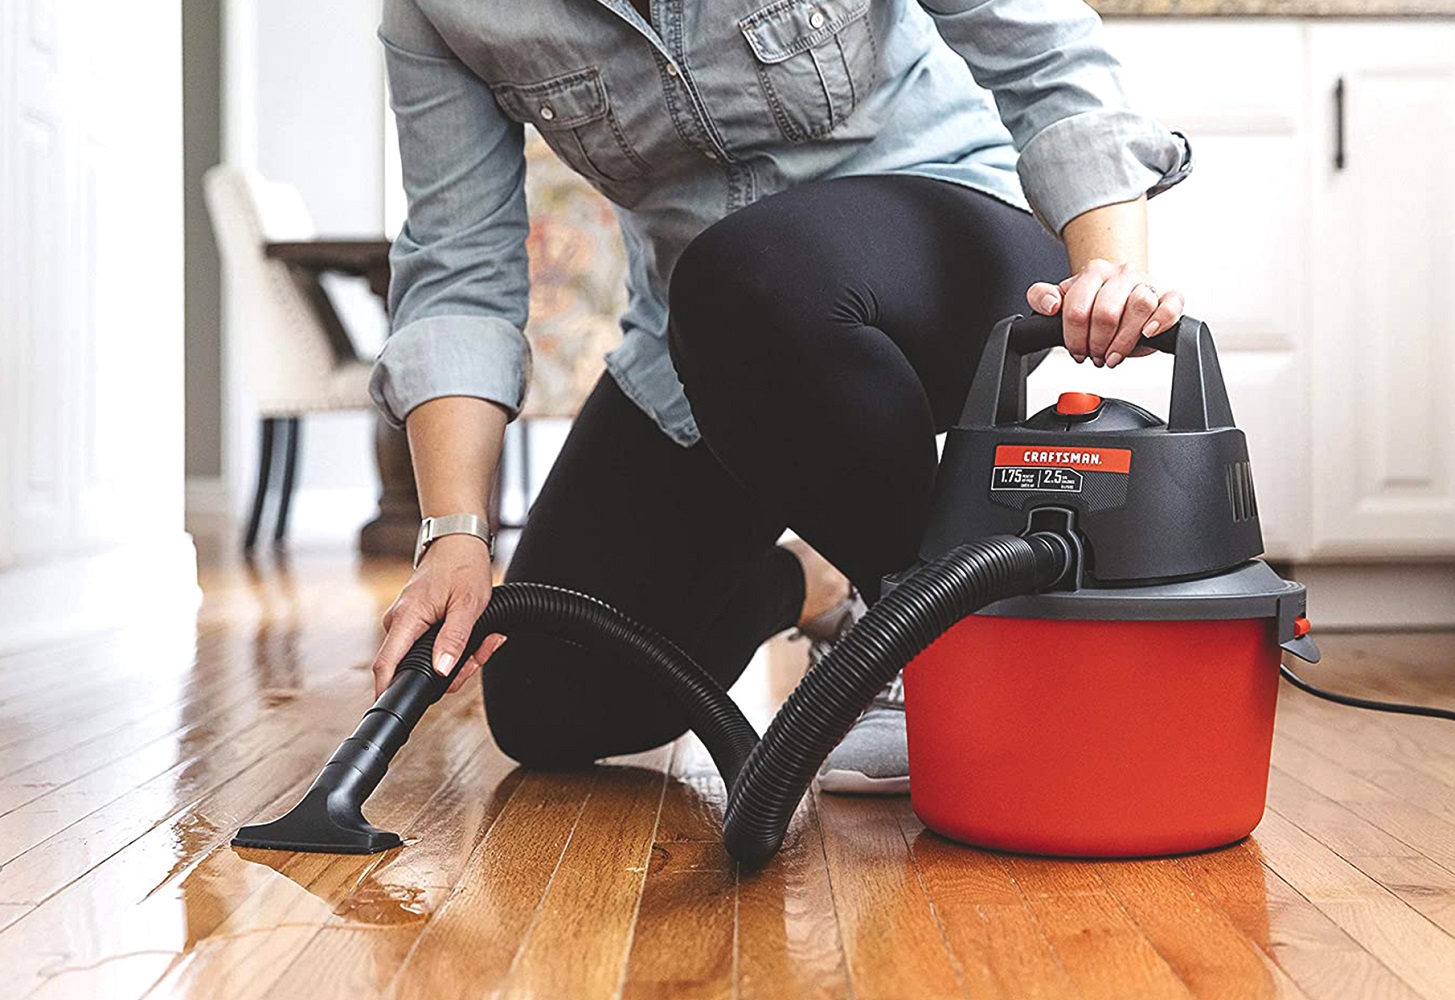 4 Best Wet/Dry Vacuums for August 2022 | Check Reviews